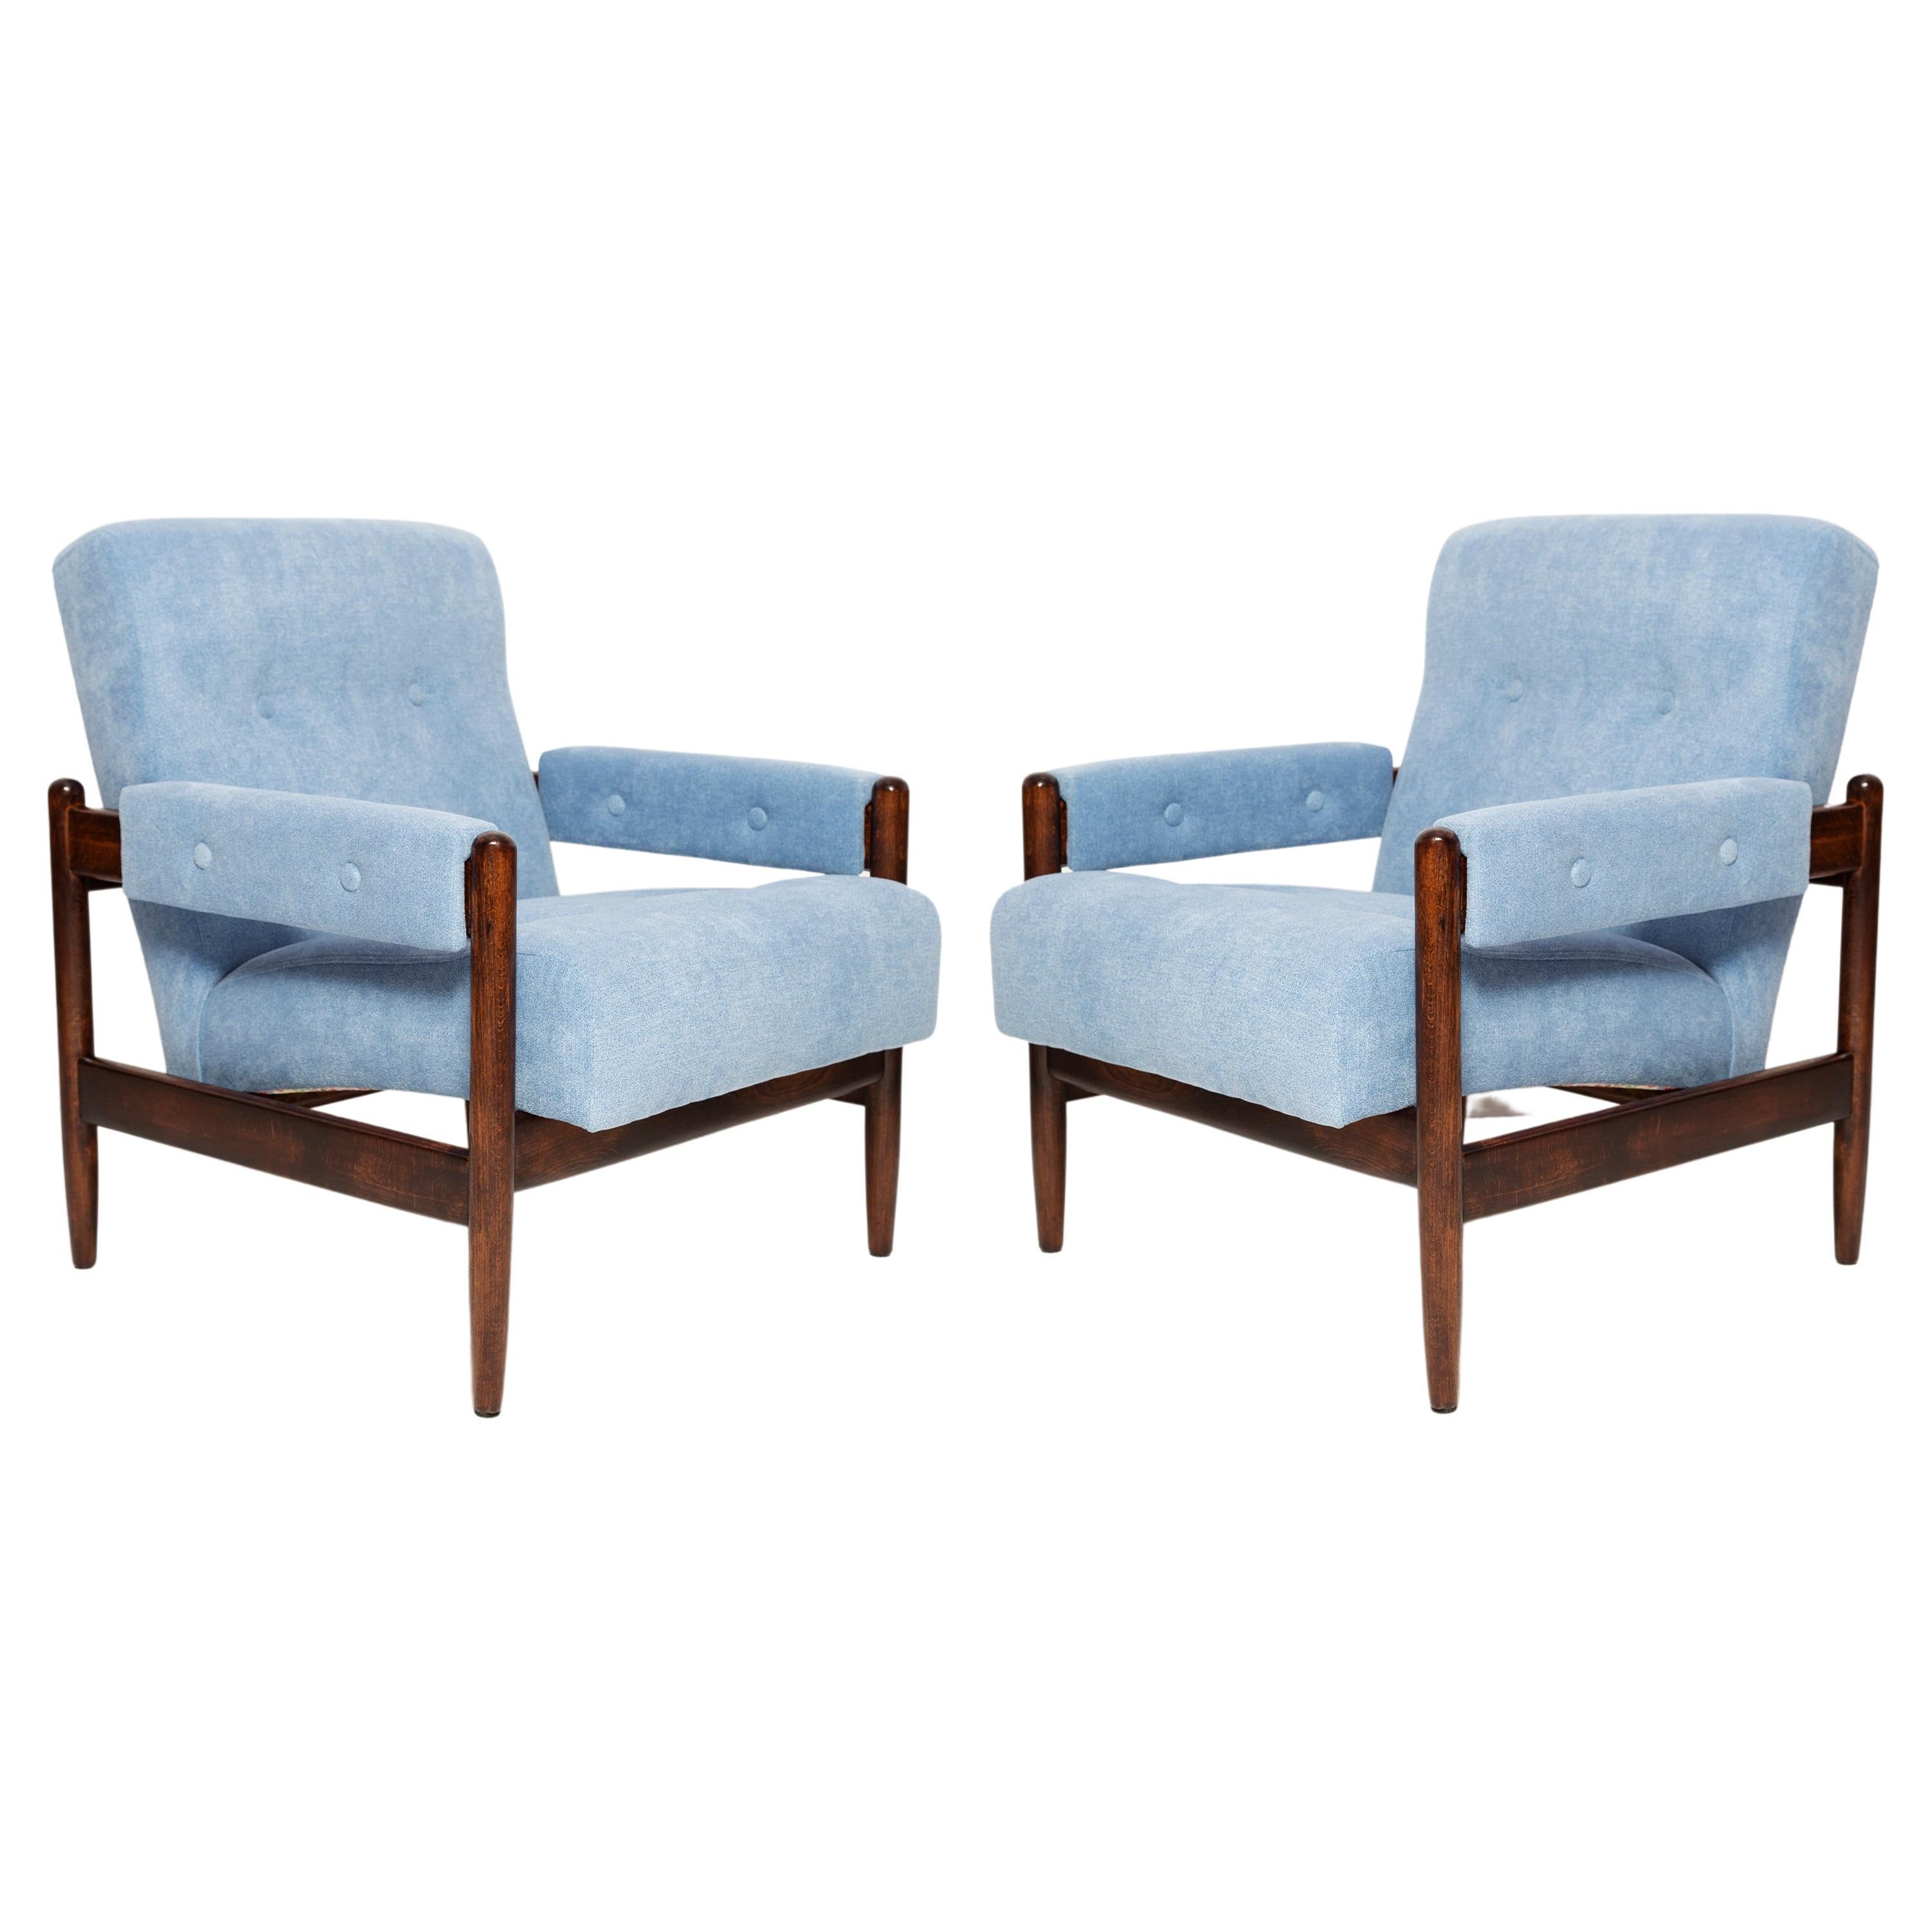 Set of Two Mid Century Blue Velvet Vintage Armchairs, Walnut Wood, Europe, 1960s For Sale